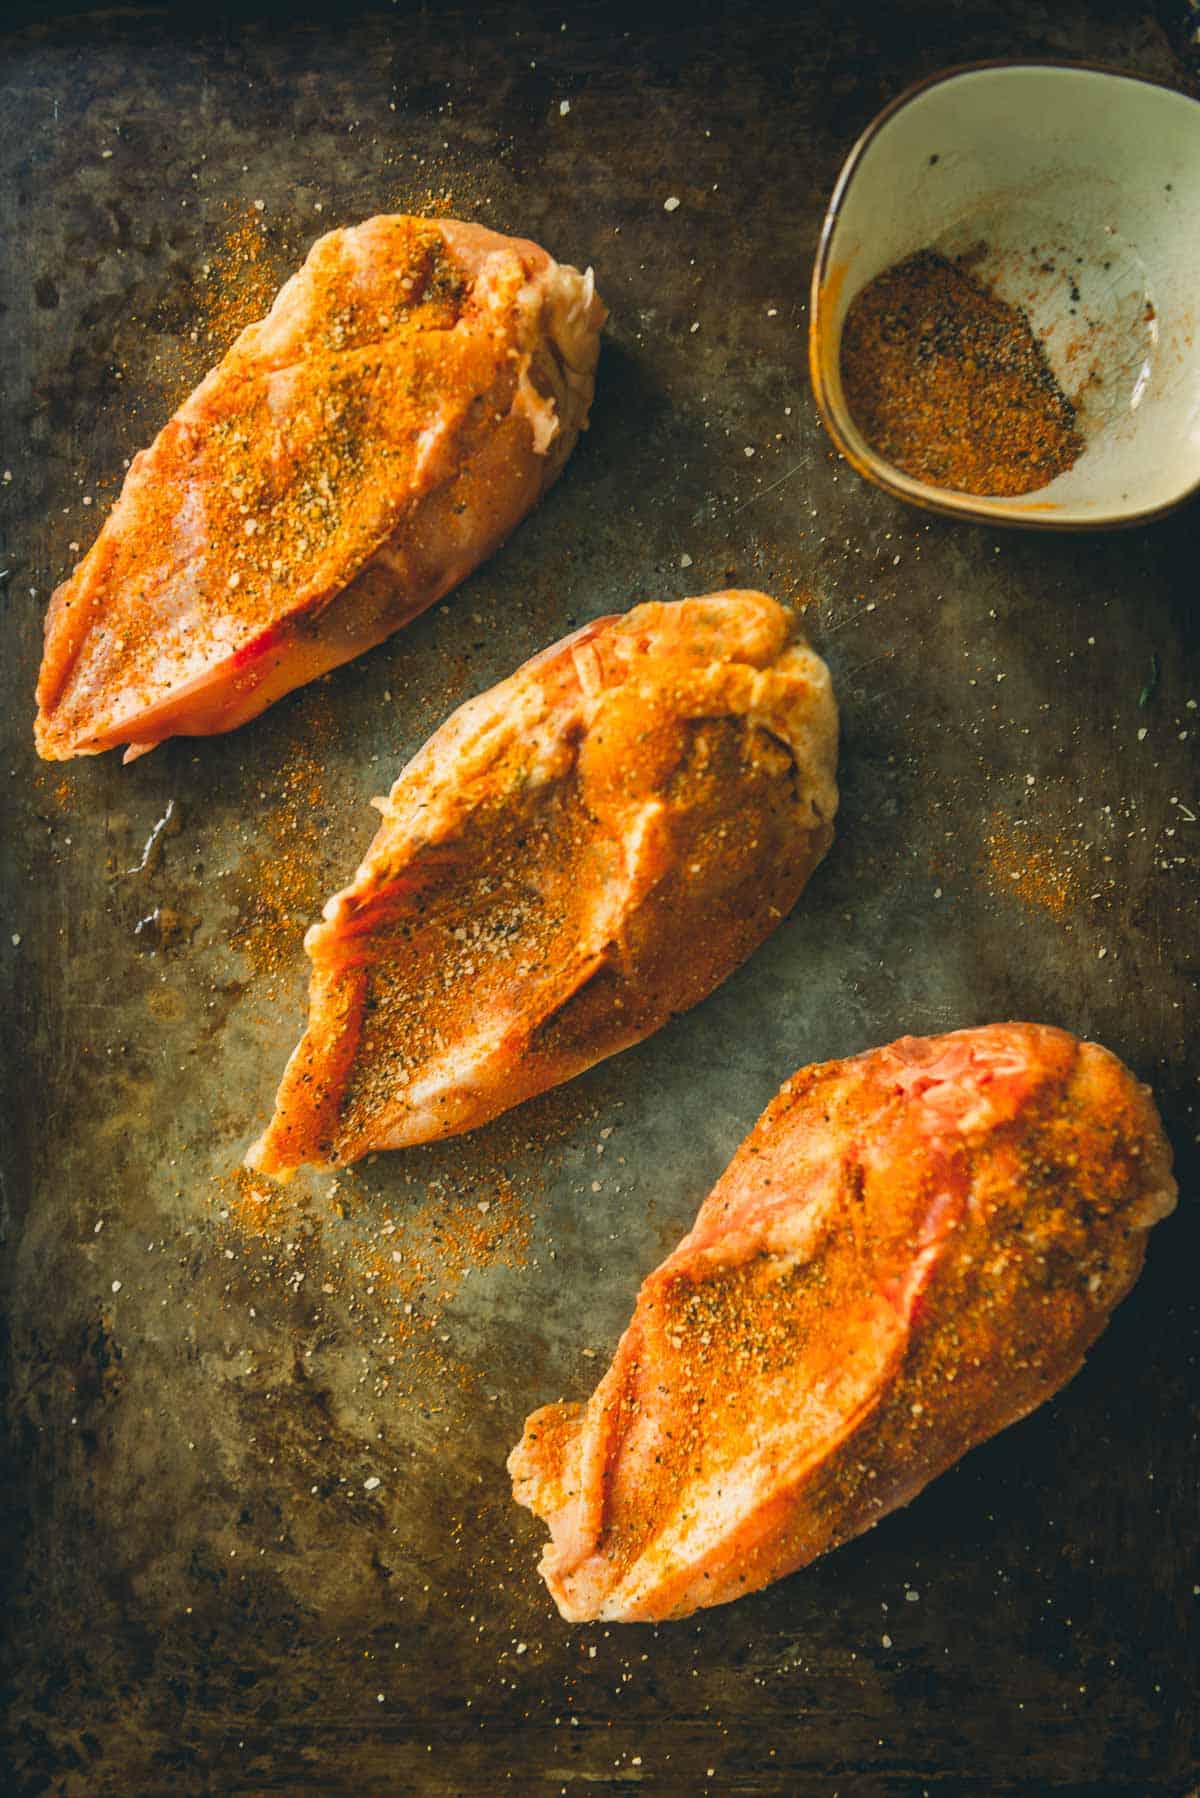 Split chicken breasts rubbed with spices.